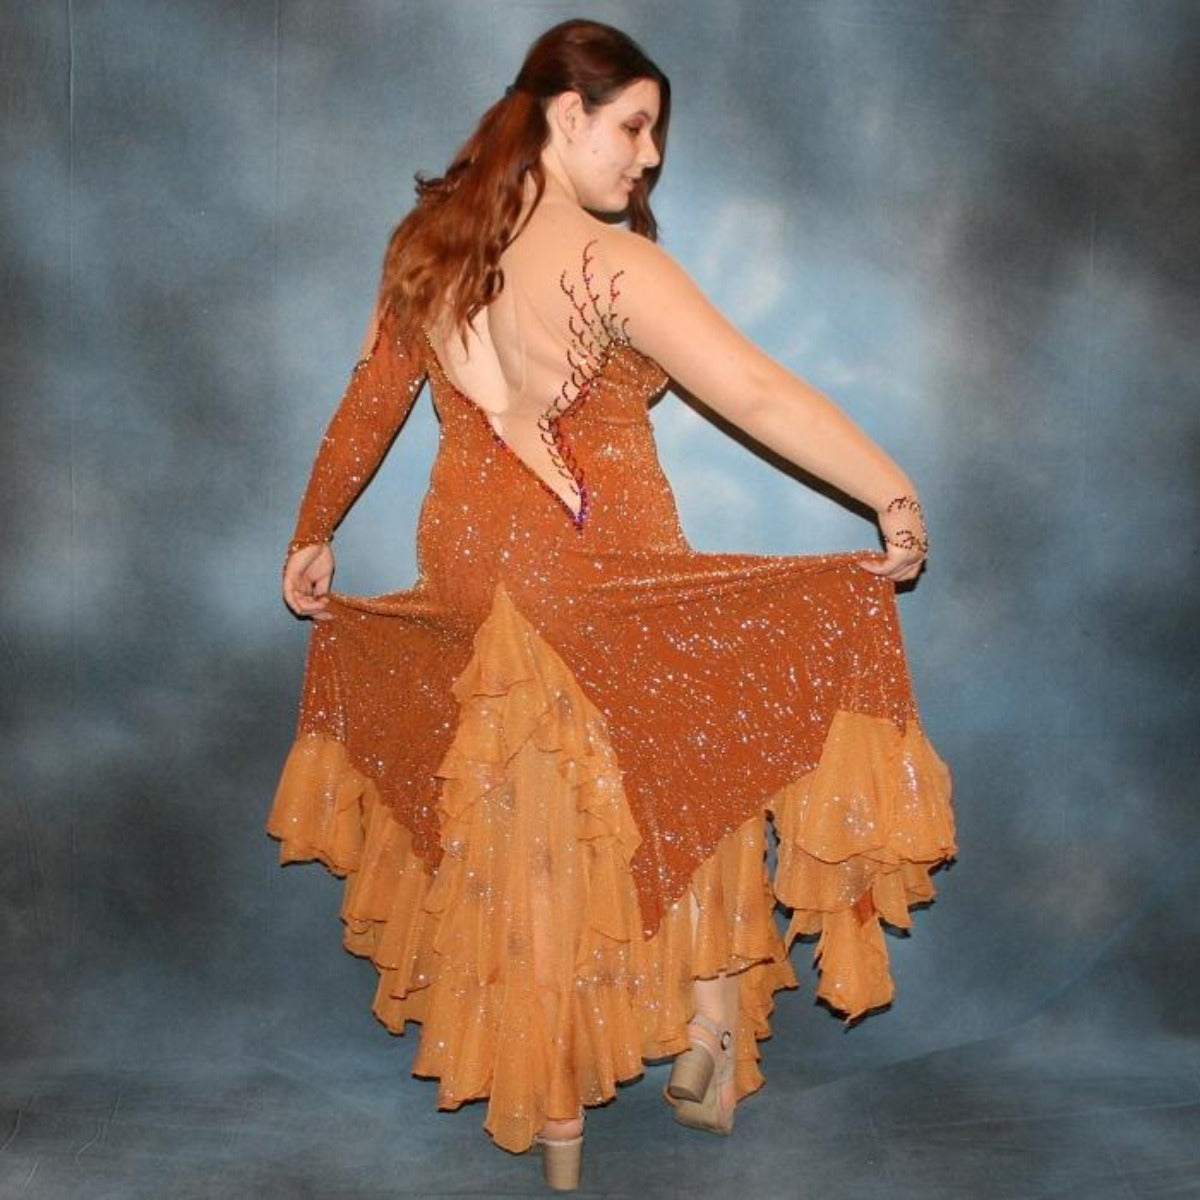 Crystal's Creations back view of Bronze ballroom dress created in bronze glitter slinky with a swirl/ripple design on nude illusion base with oodles of amber glitter chiffon flounces, is embellished with volcano Swarovski rhinestone work.